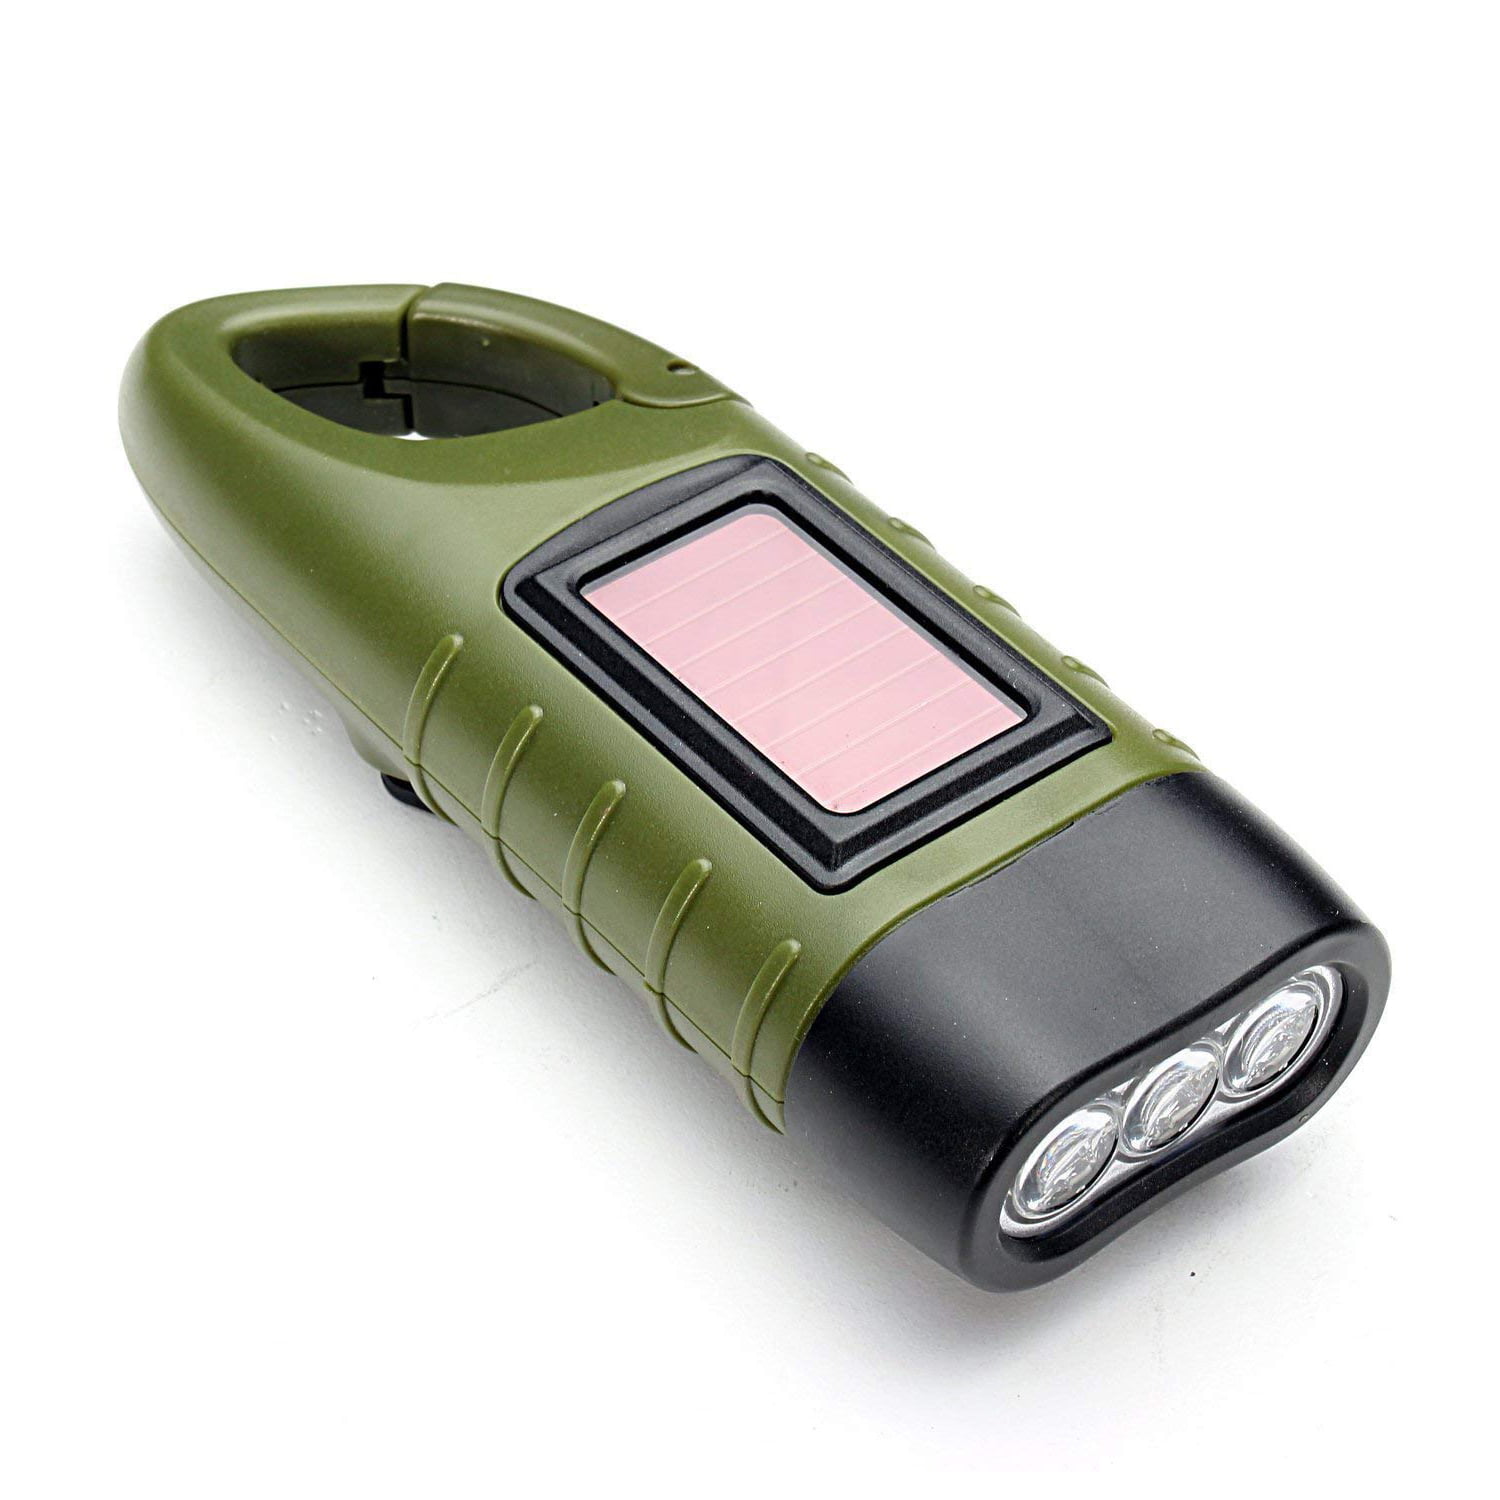 Travelwant Rechargeable Waterproof Solar Powered Rechargeable LED Flashlight Hand Crank Emergency Light Survival Gear Best for Fishing Hiking Backpack